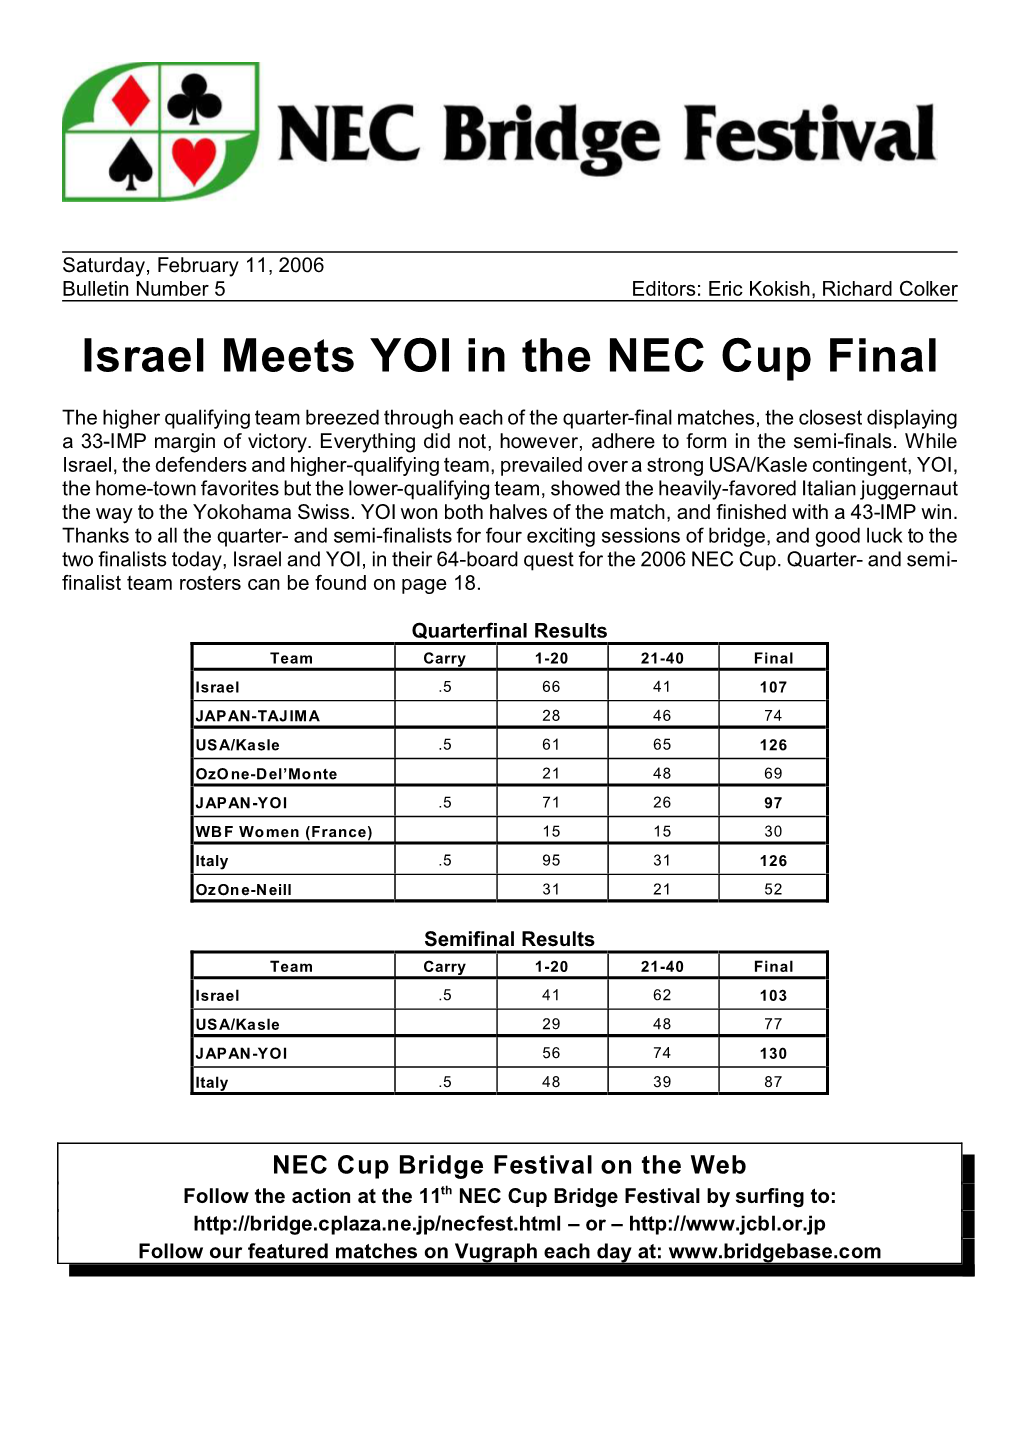 Israel Meets YOI in the NEC Cup Final